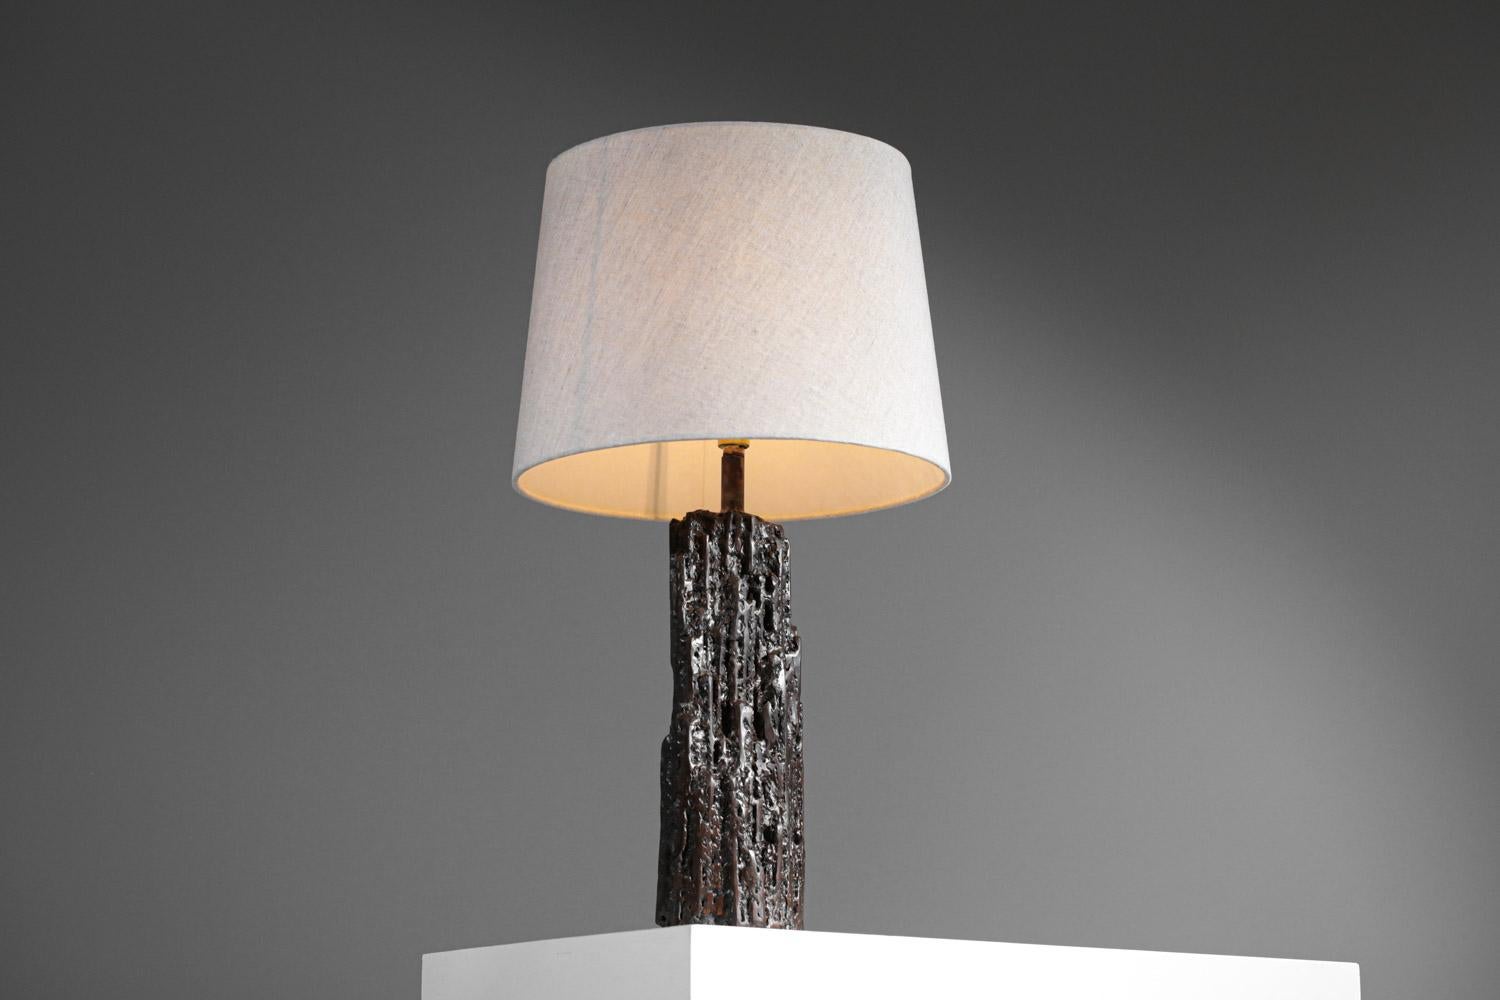 French Table lamp by Donna for Danke Galerie with patinated metal base DONNA For Sale